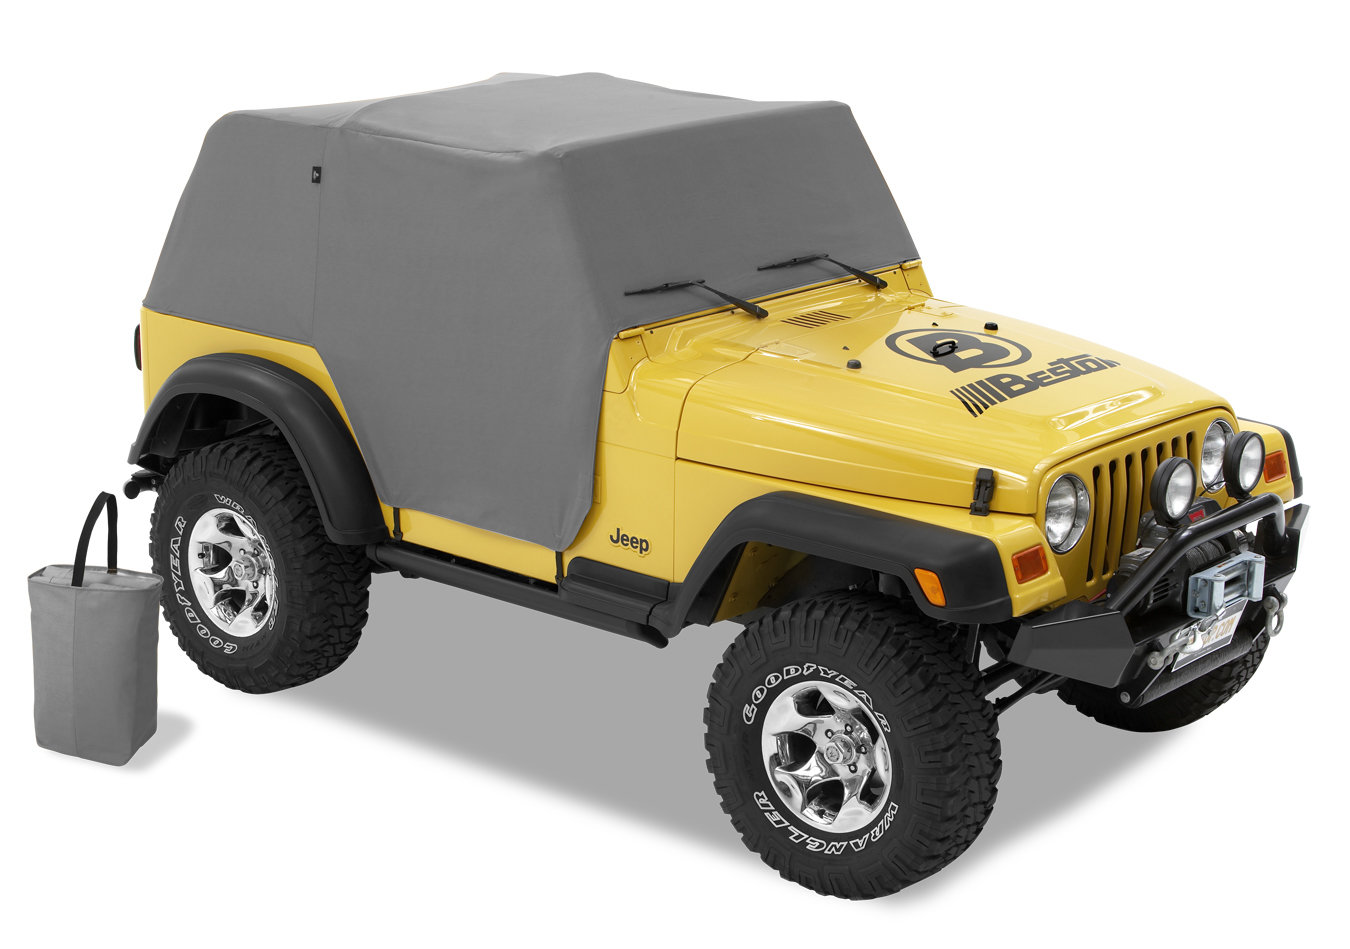 Bestop All Weather Trail Cover for 97-06 Jeep® Wrangler TJ | Quadratec